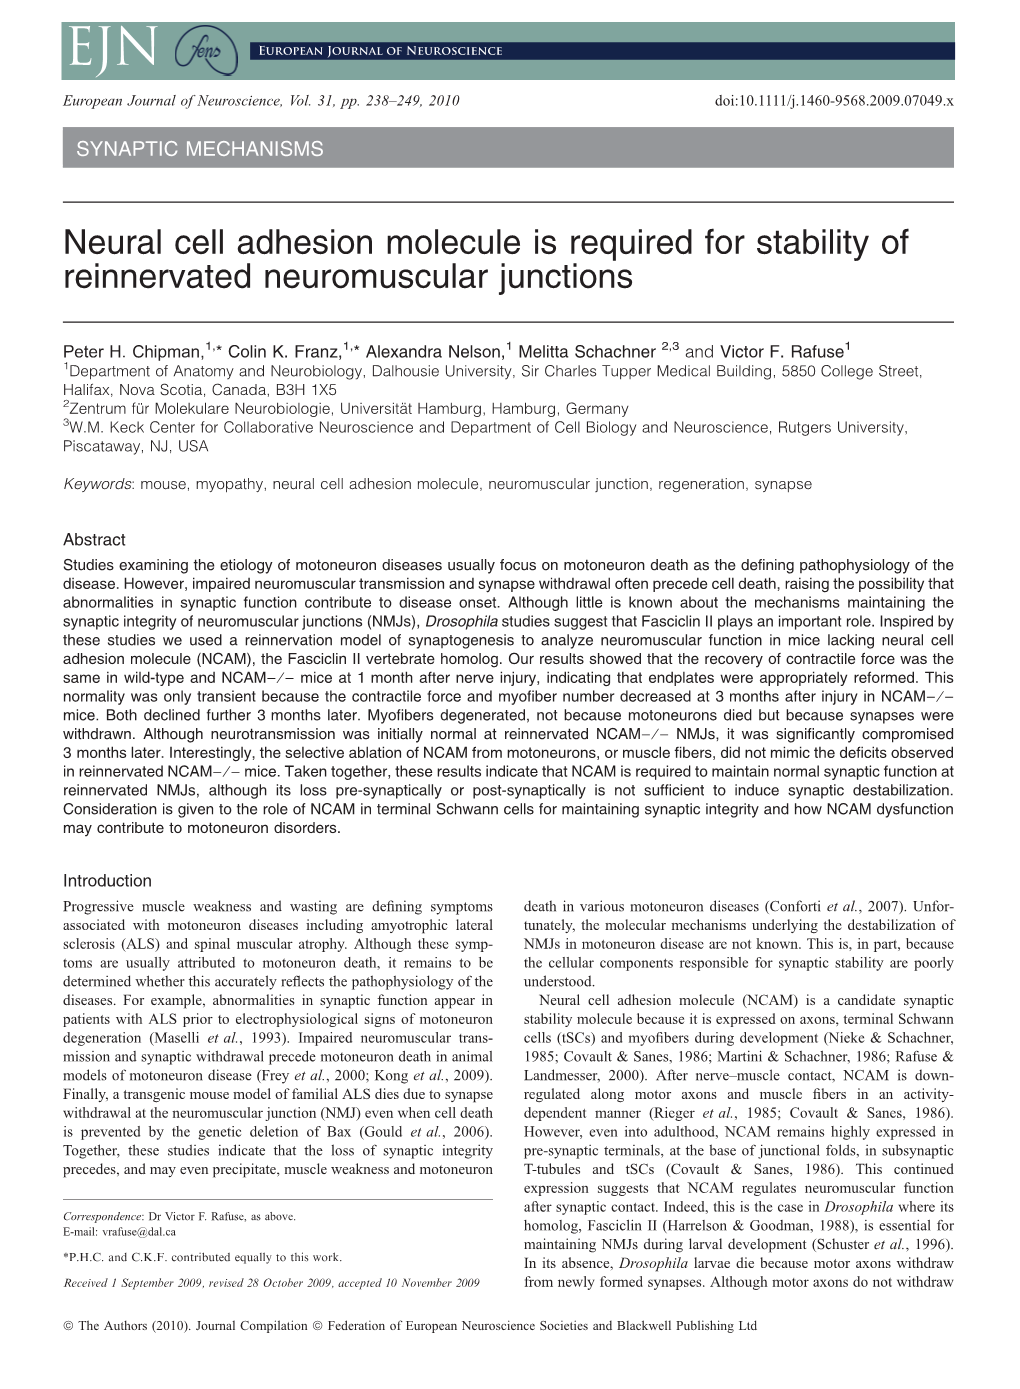 Neural Cell Adhesion Molecule Is Required for Stability of Reinnervated Neuromuscular Junctions